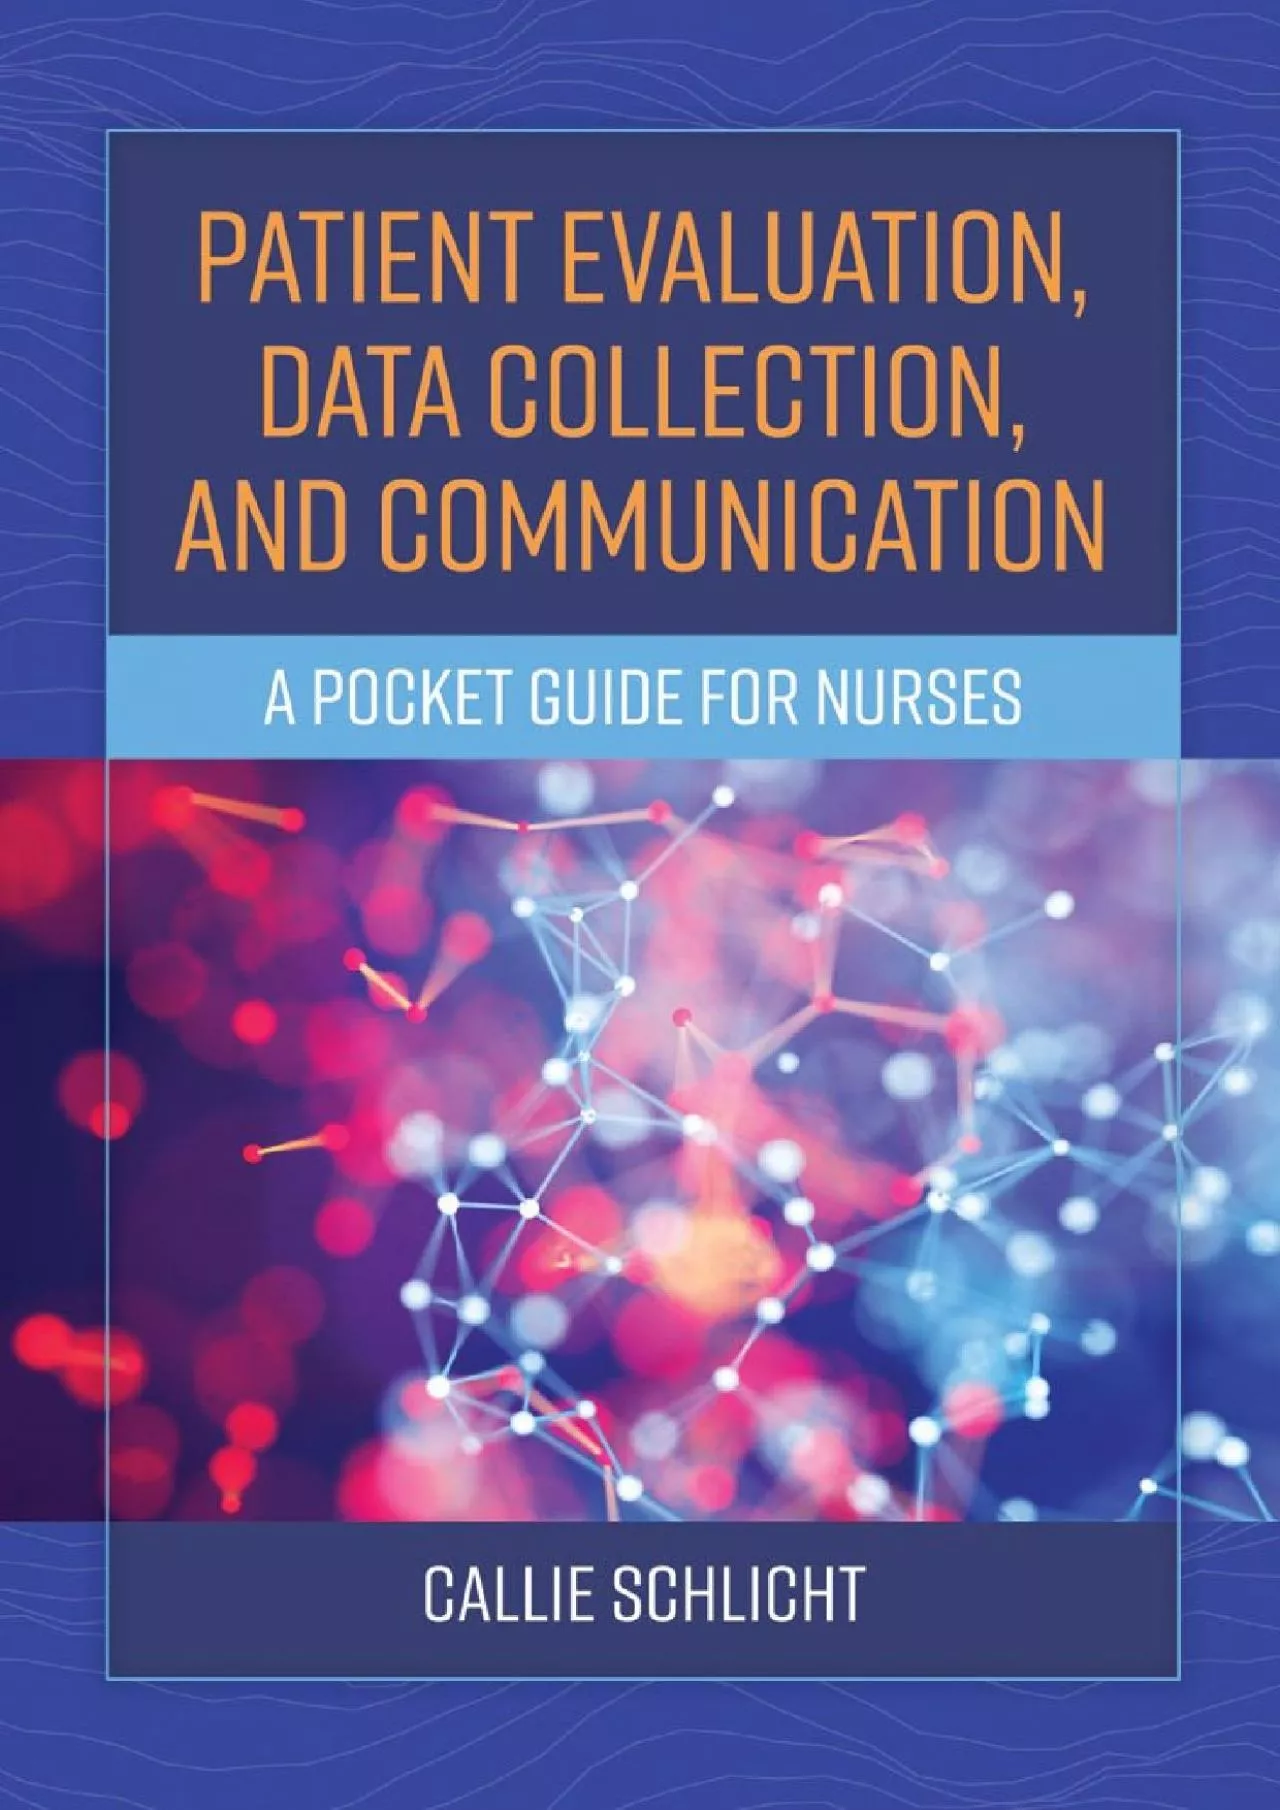 (DOWNLOAD)-Patient Evaluation, Data Collection, and Communication: A Pocket Guide for